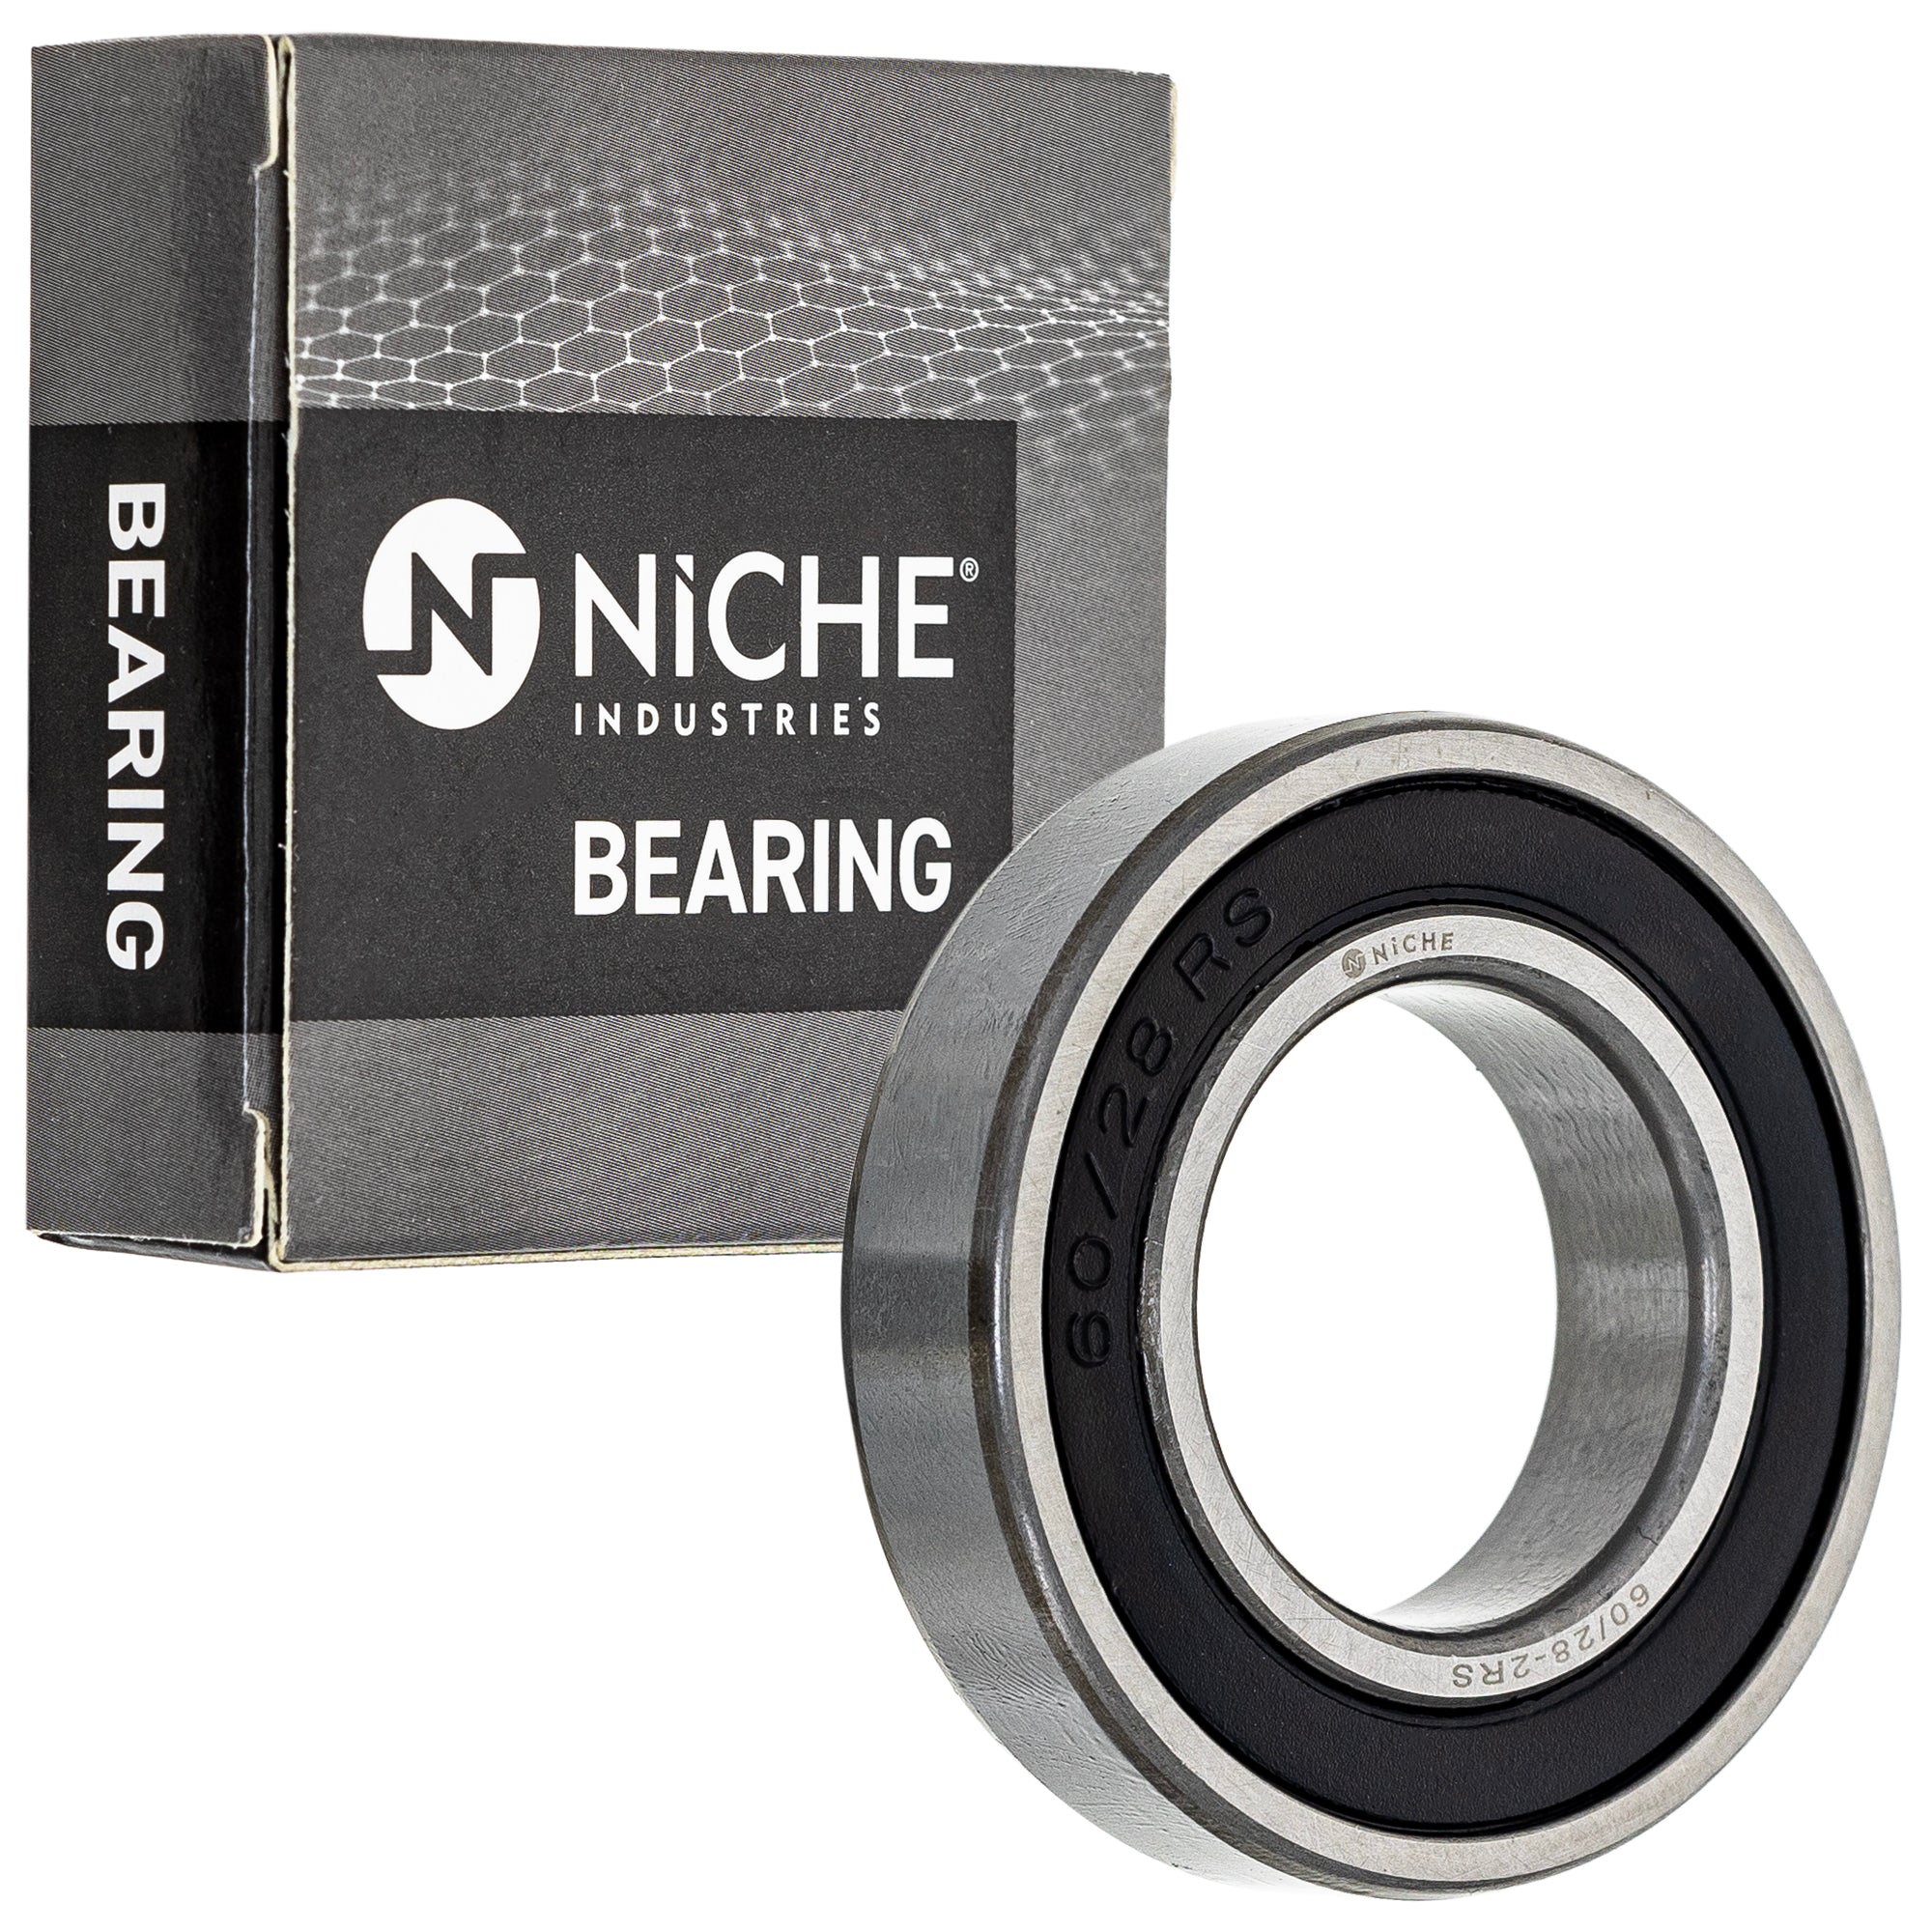 NICHE 519-CBB2264R Bearing for zOTHER ZZR600 Zephyr YZF750R YZF1000R